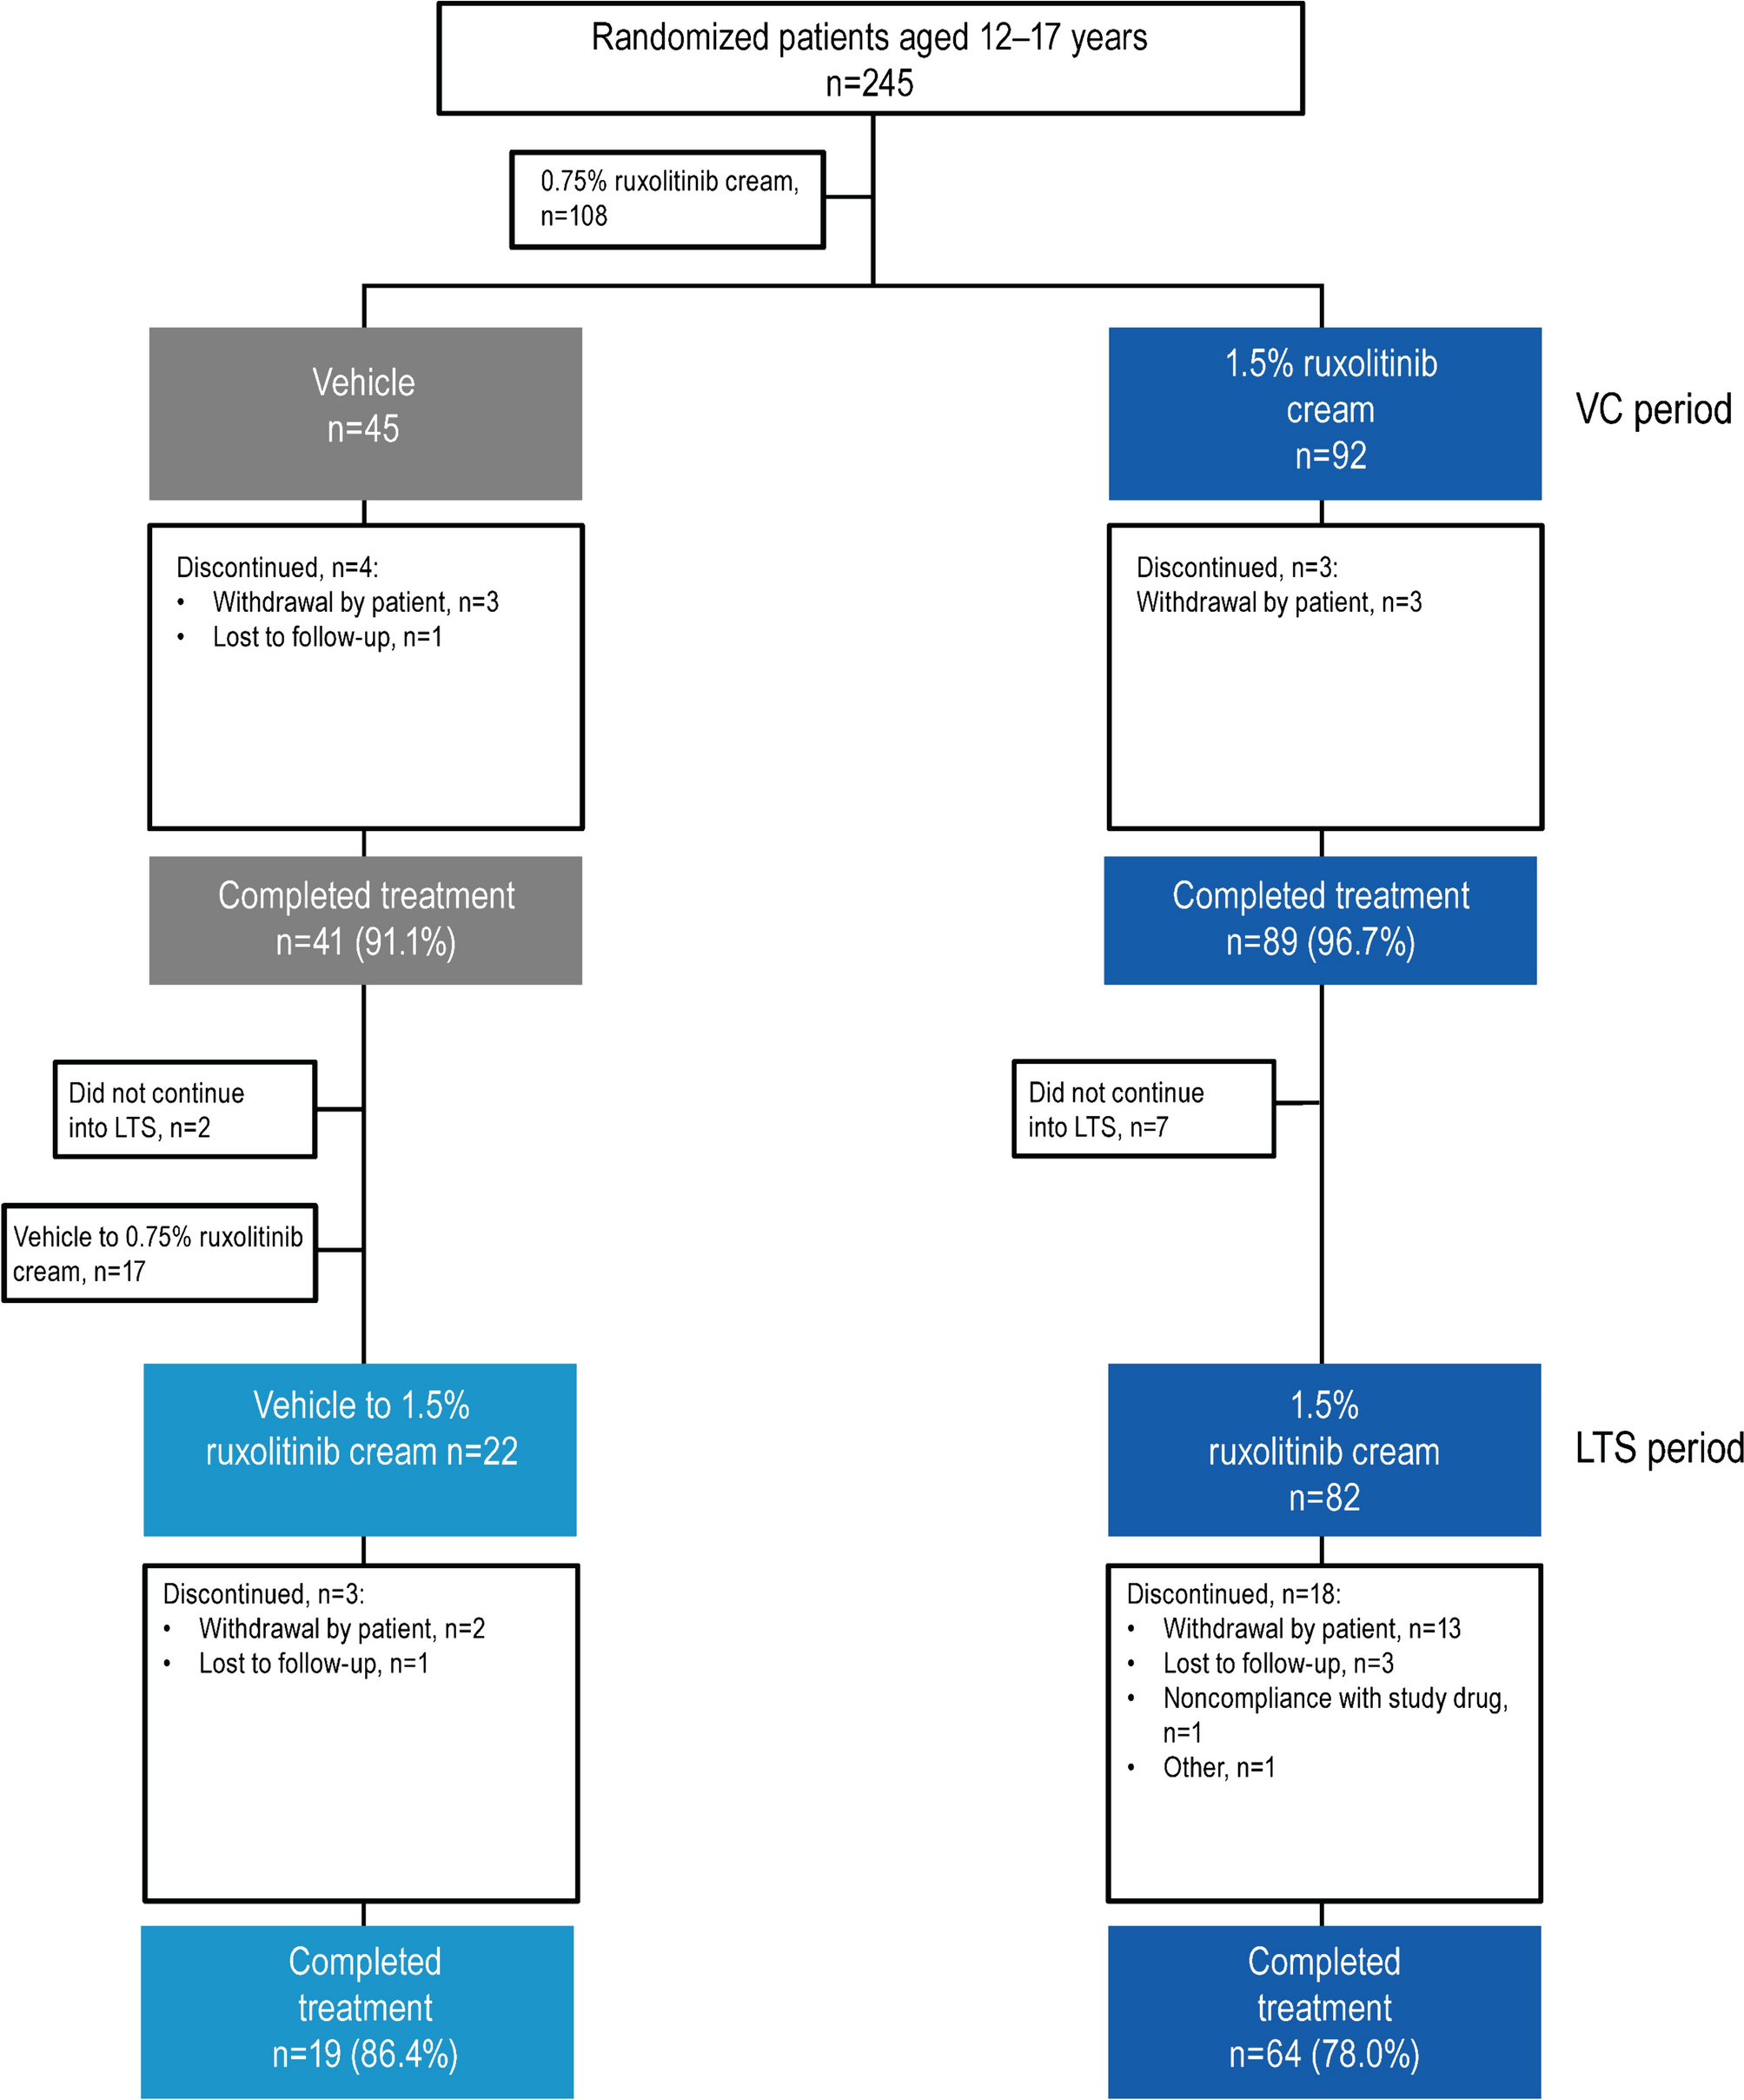 Efficacy, Safety, and Long-Term Disease Control of Ruxolitinib Cream Among Adolescents with Atopic Dermatitis: Pooled Results from Two Randomized Phase 3 Studies